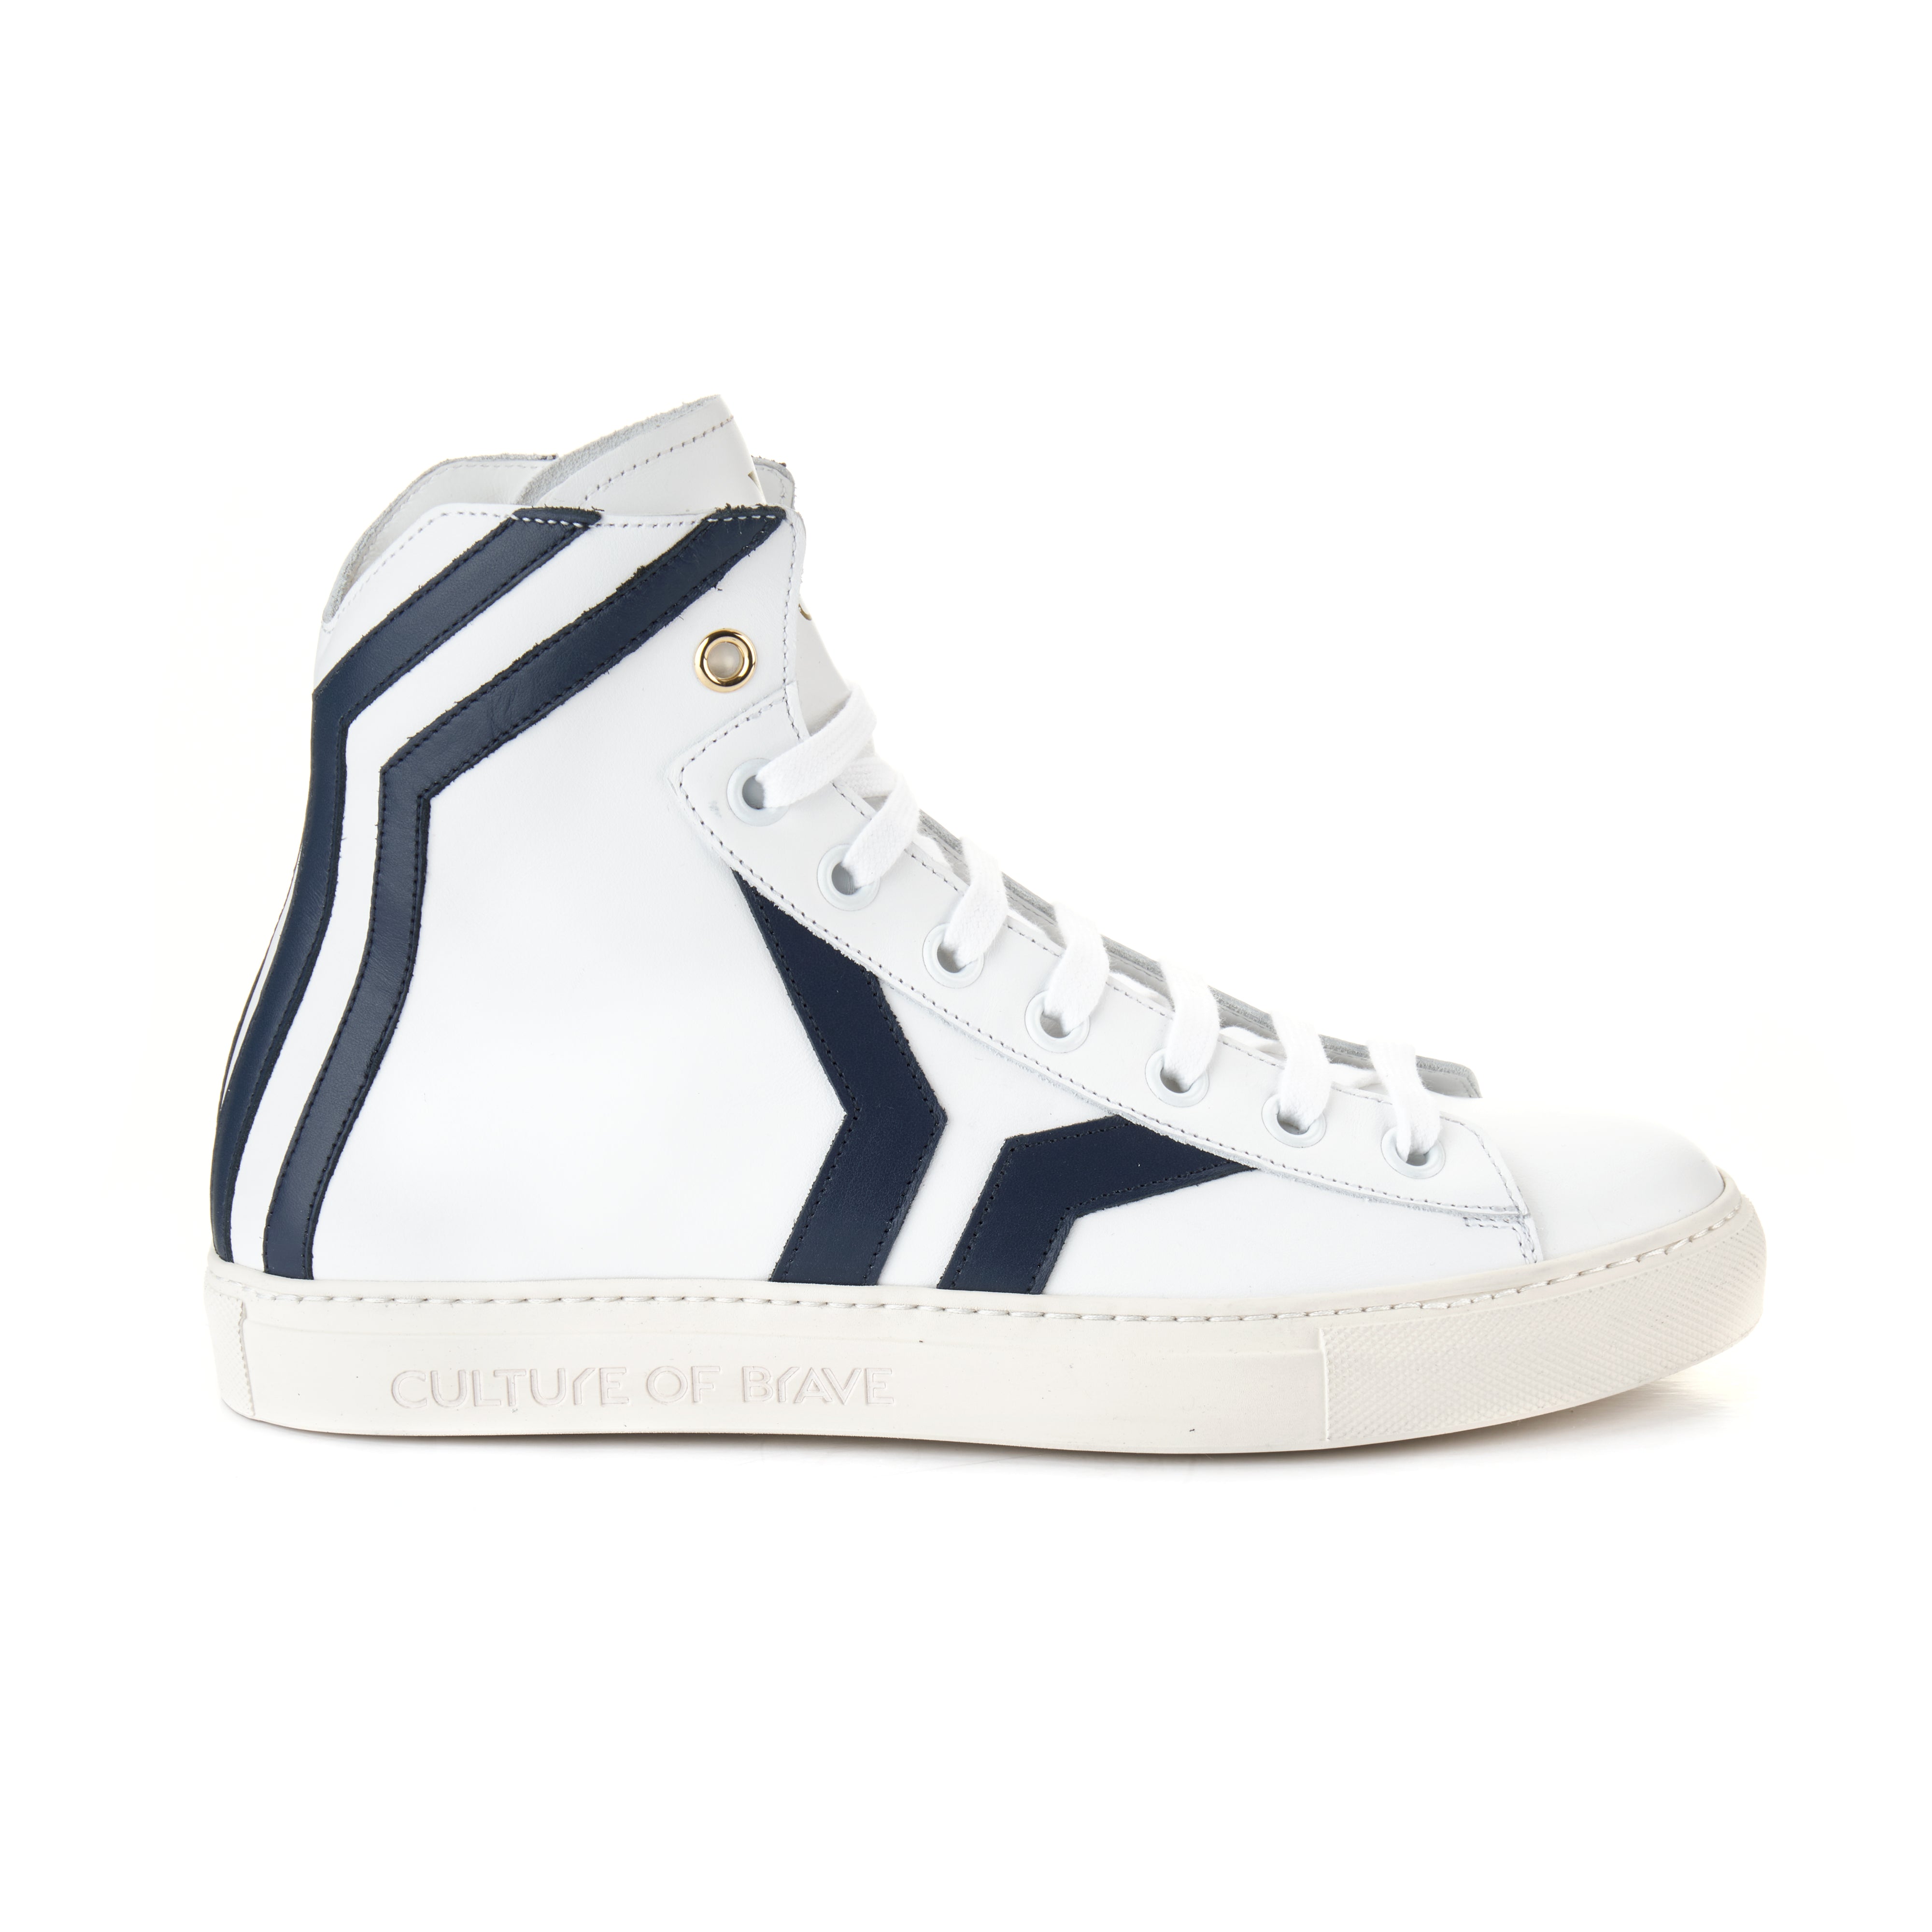 Resilient S24 Women White leather navy wing mid cut